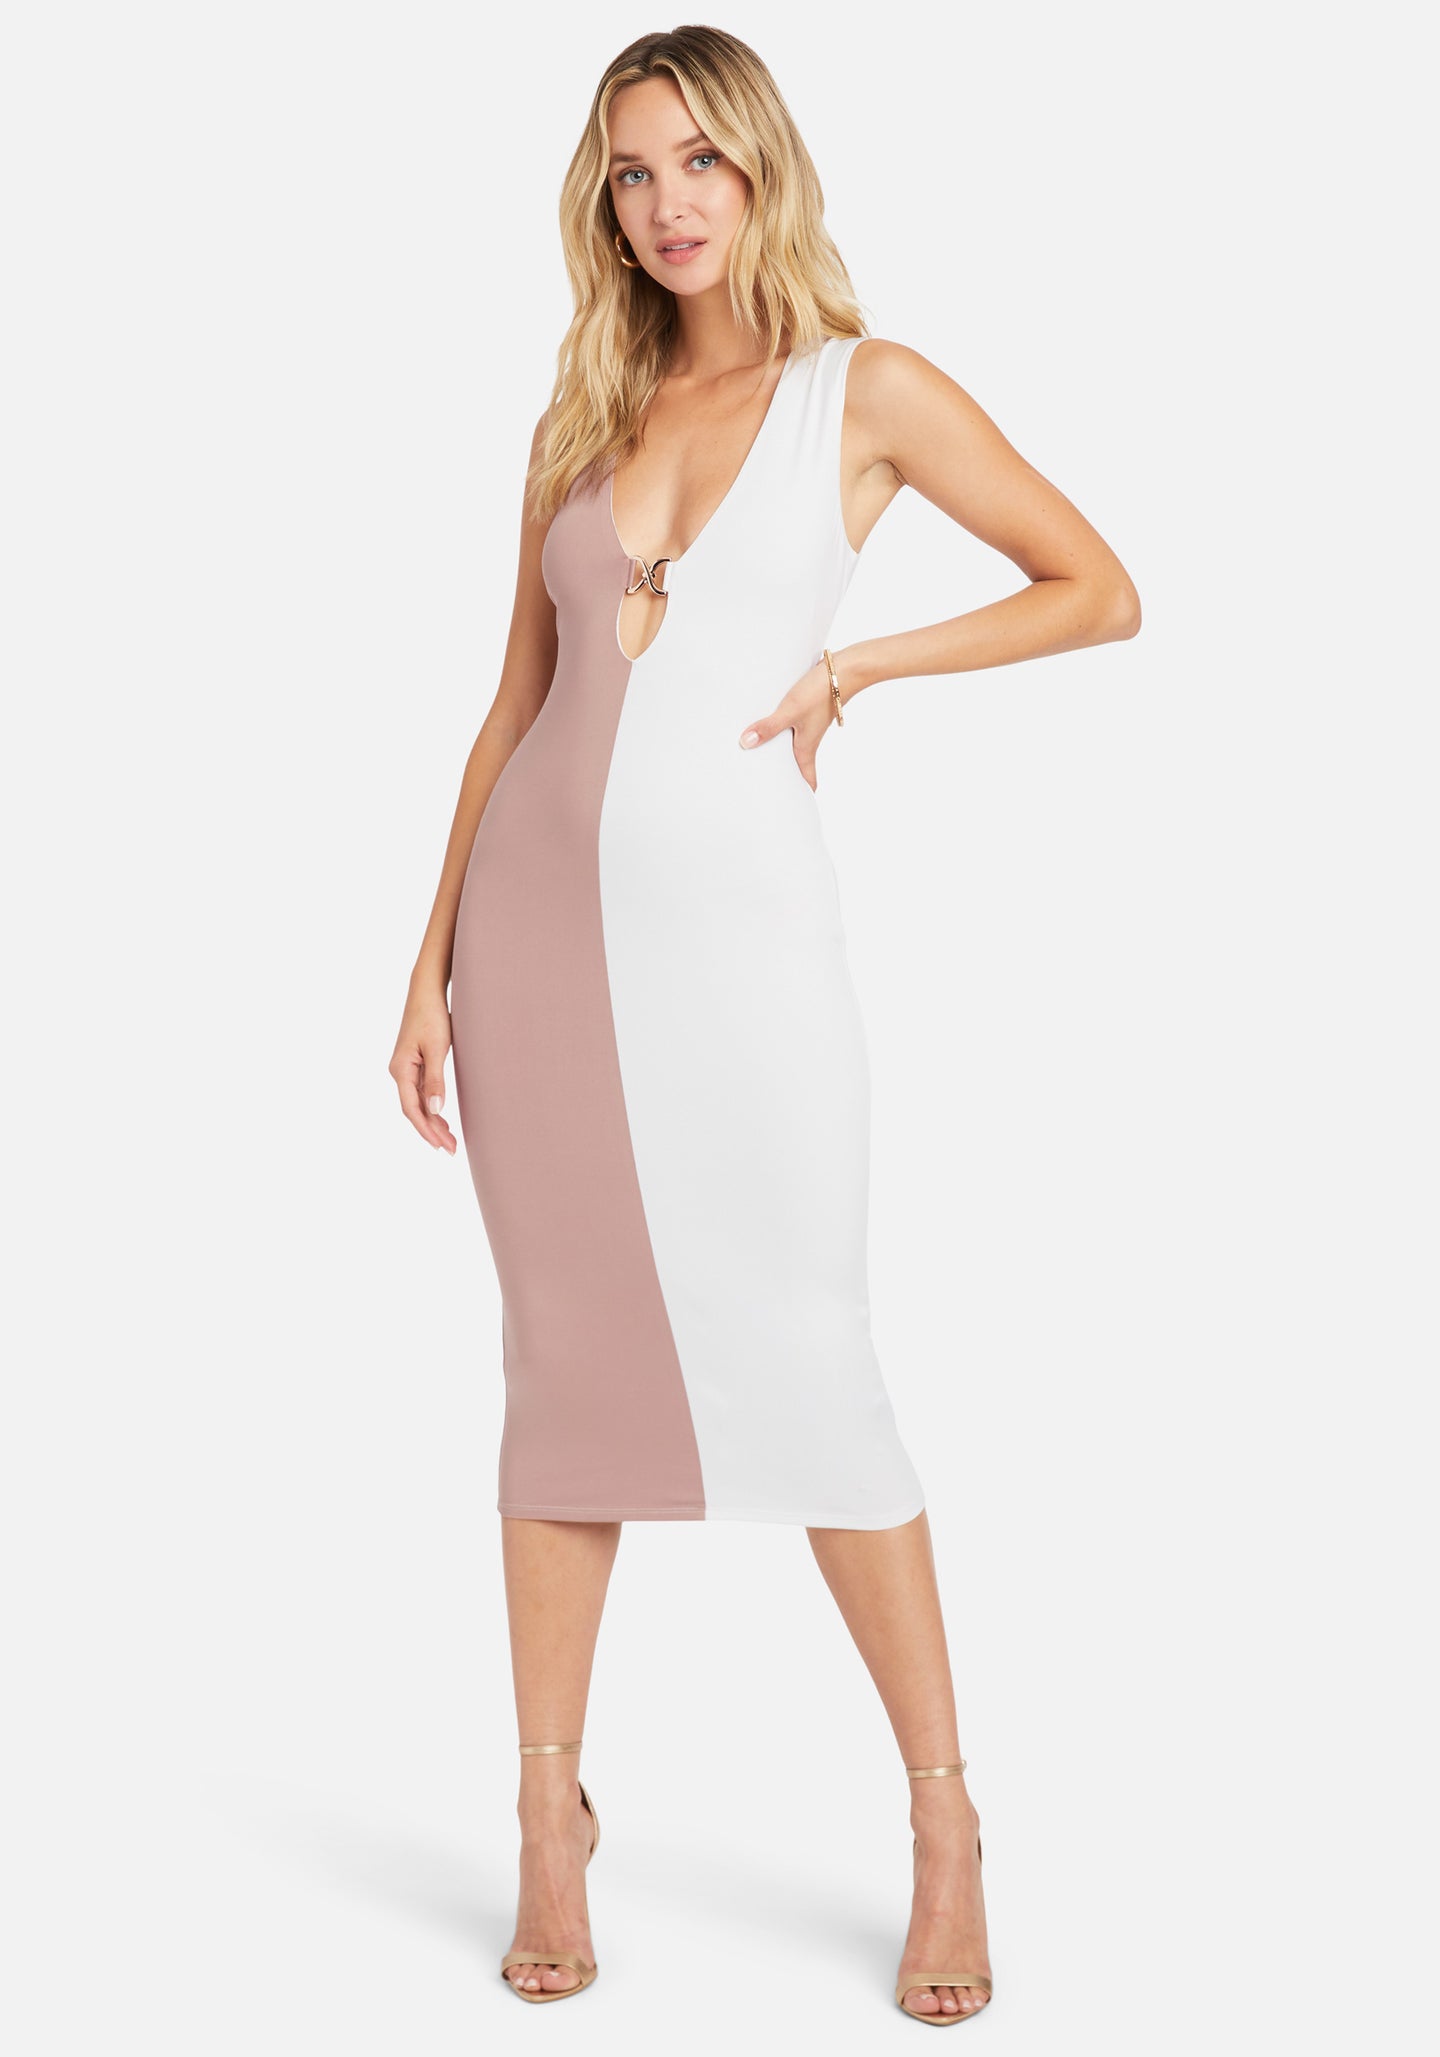 Bebe: 40% Off Sale on Sale with Code LOVE40